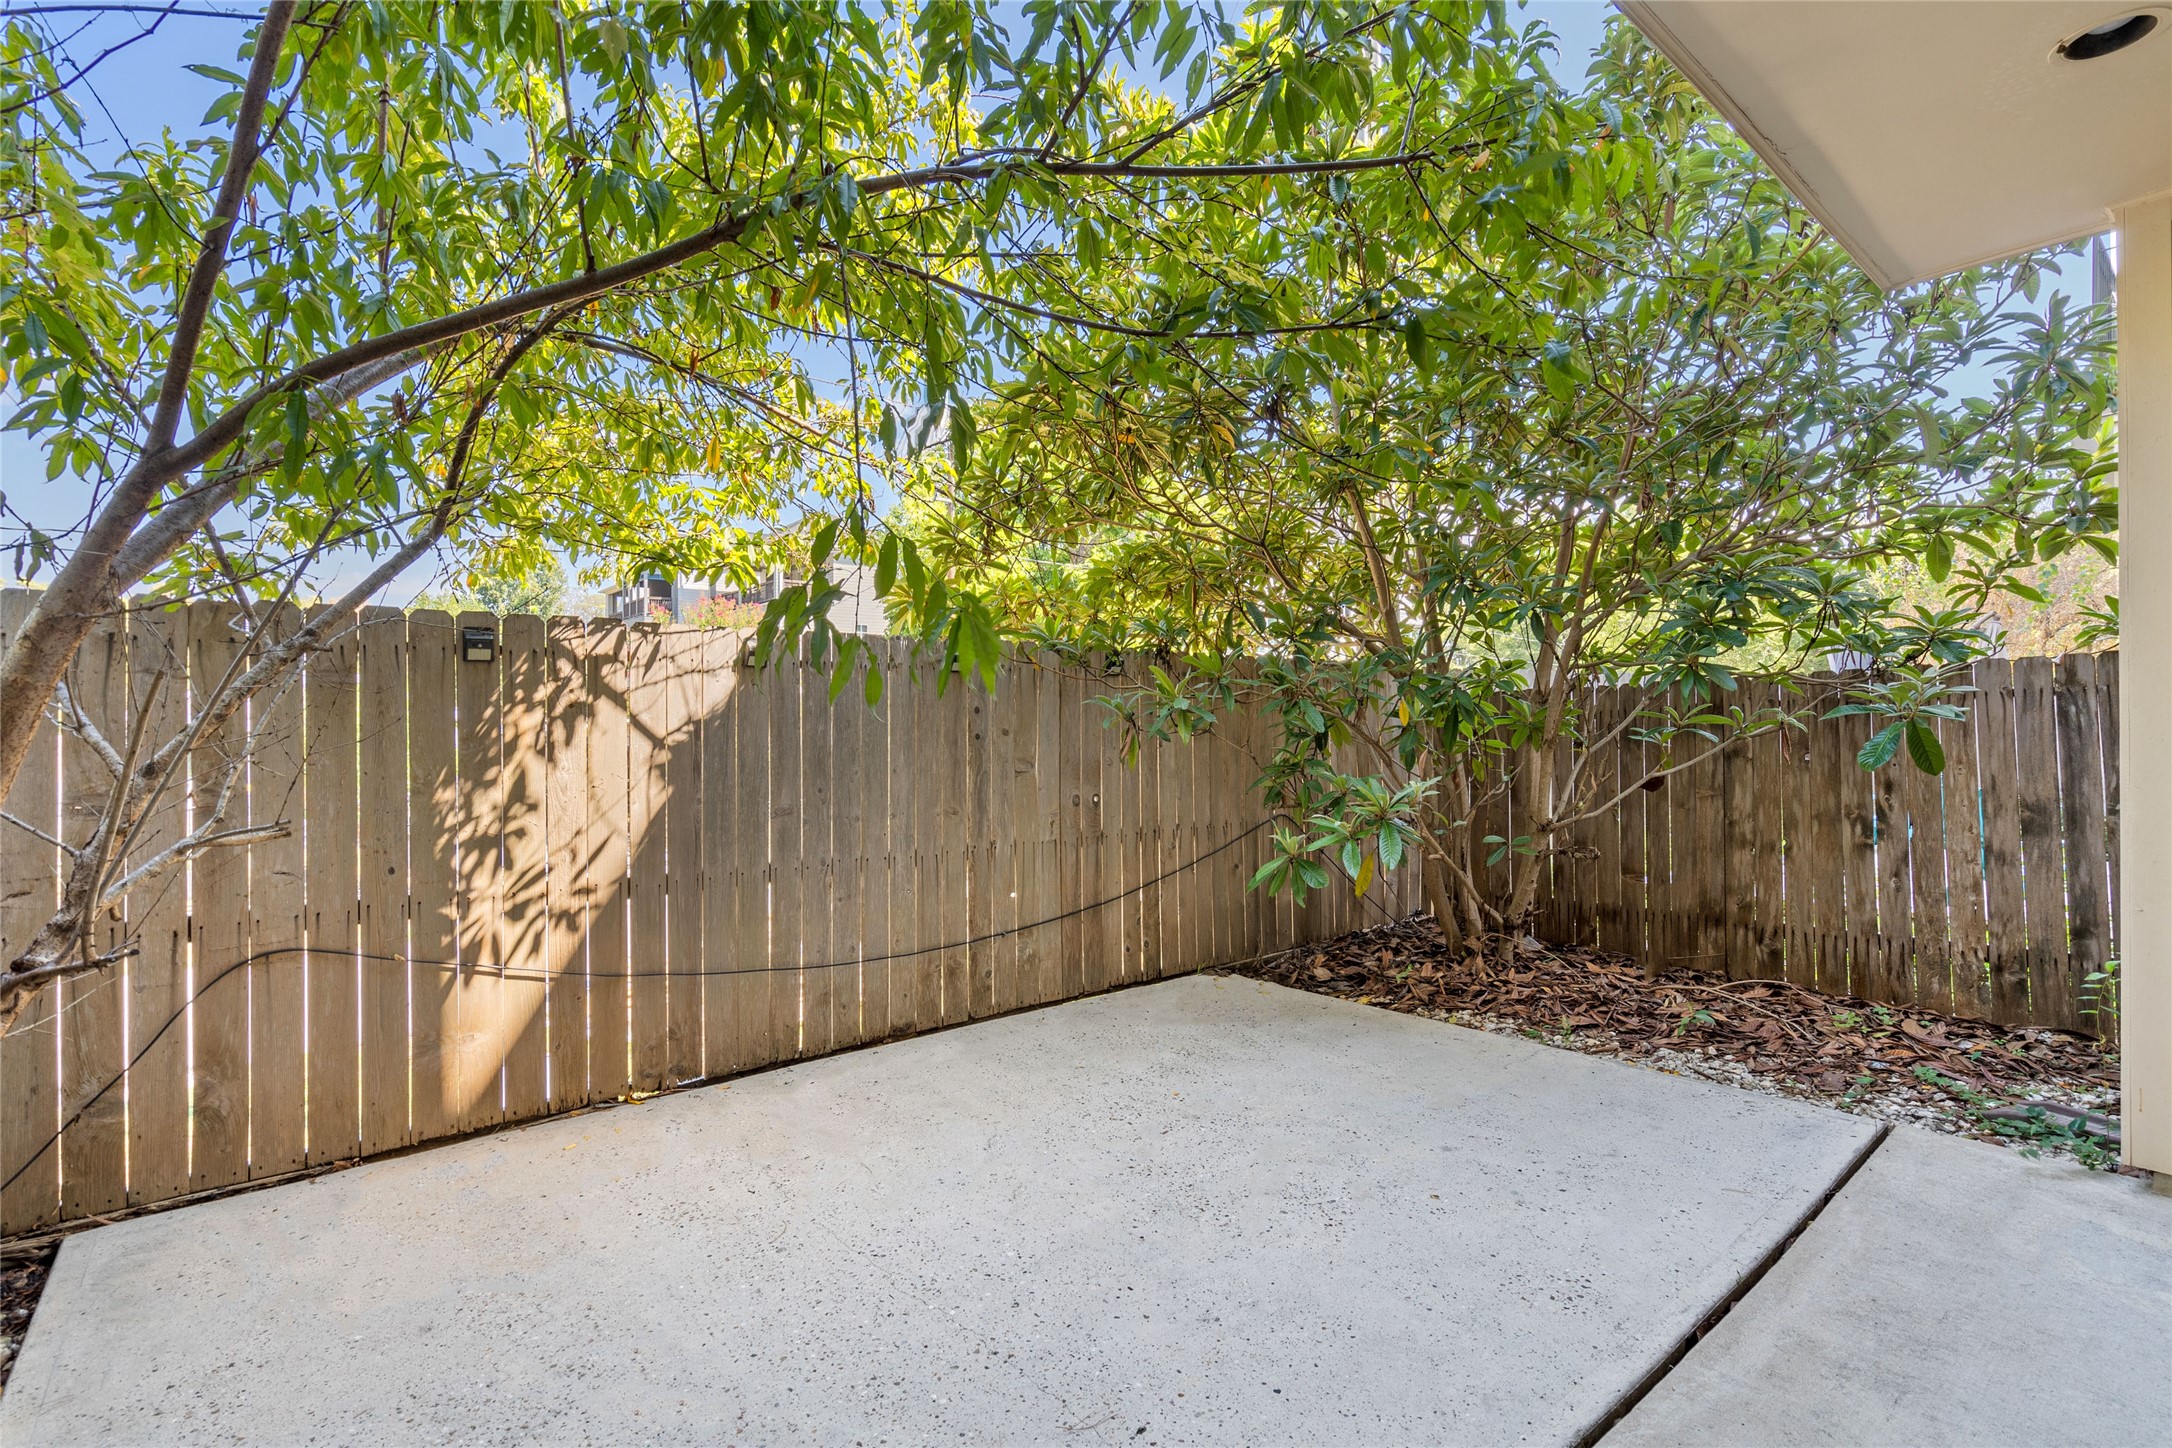 The back yard patio is the perfect space for the cooler summer evenings or weekend barbecues. Per seller, there are peach and loquat trees to enjoy!